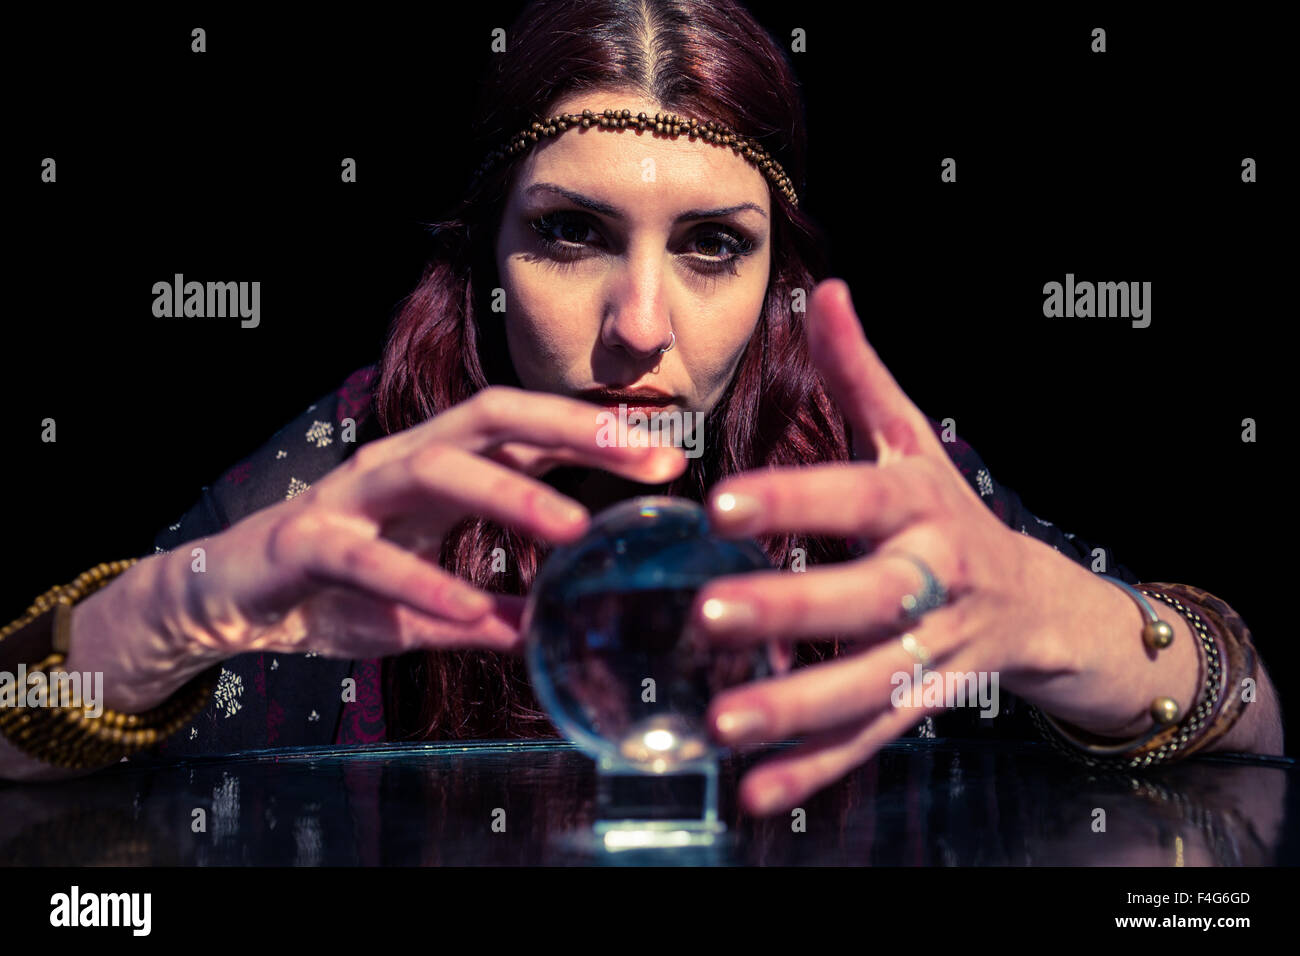 Portrait of woman using crystal ball Stock Photo